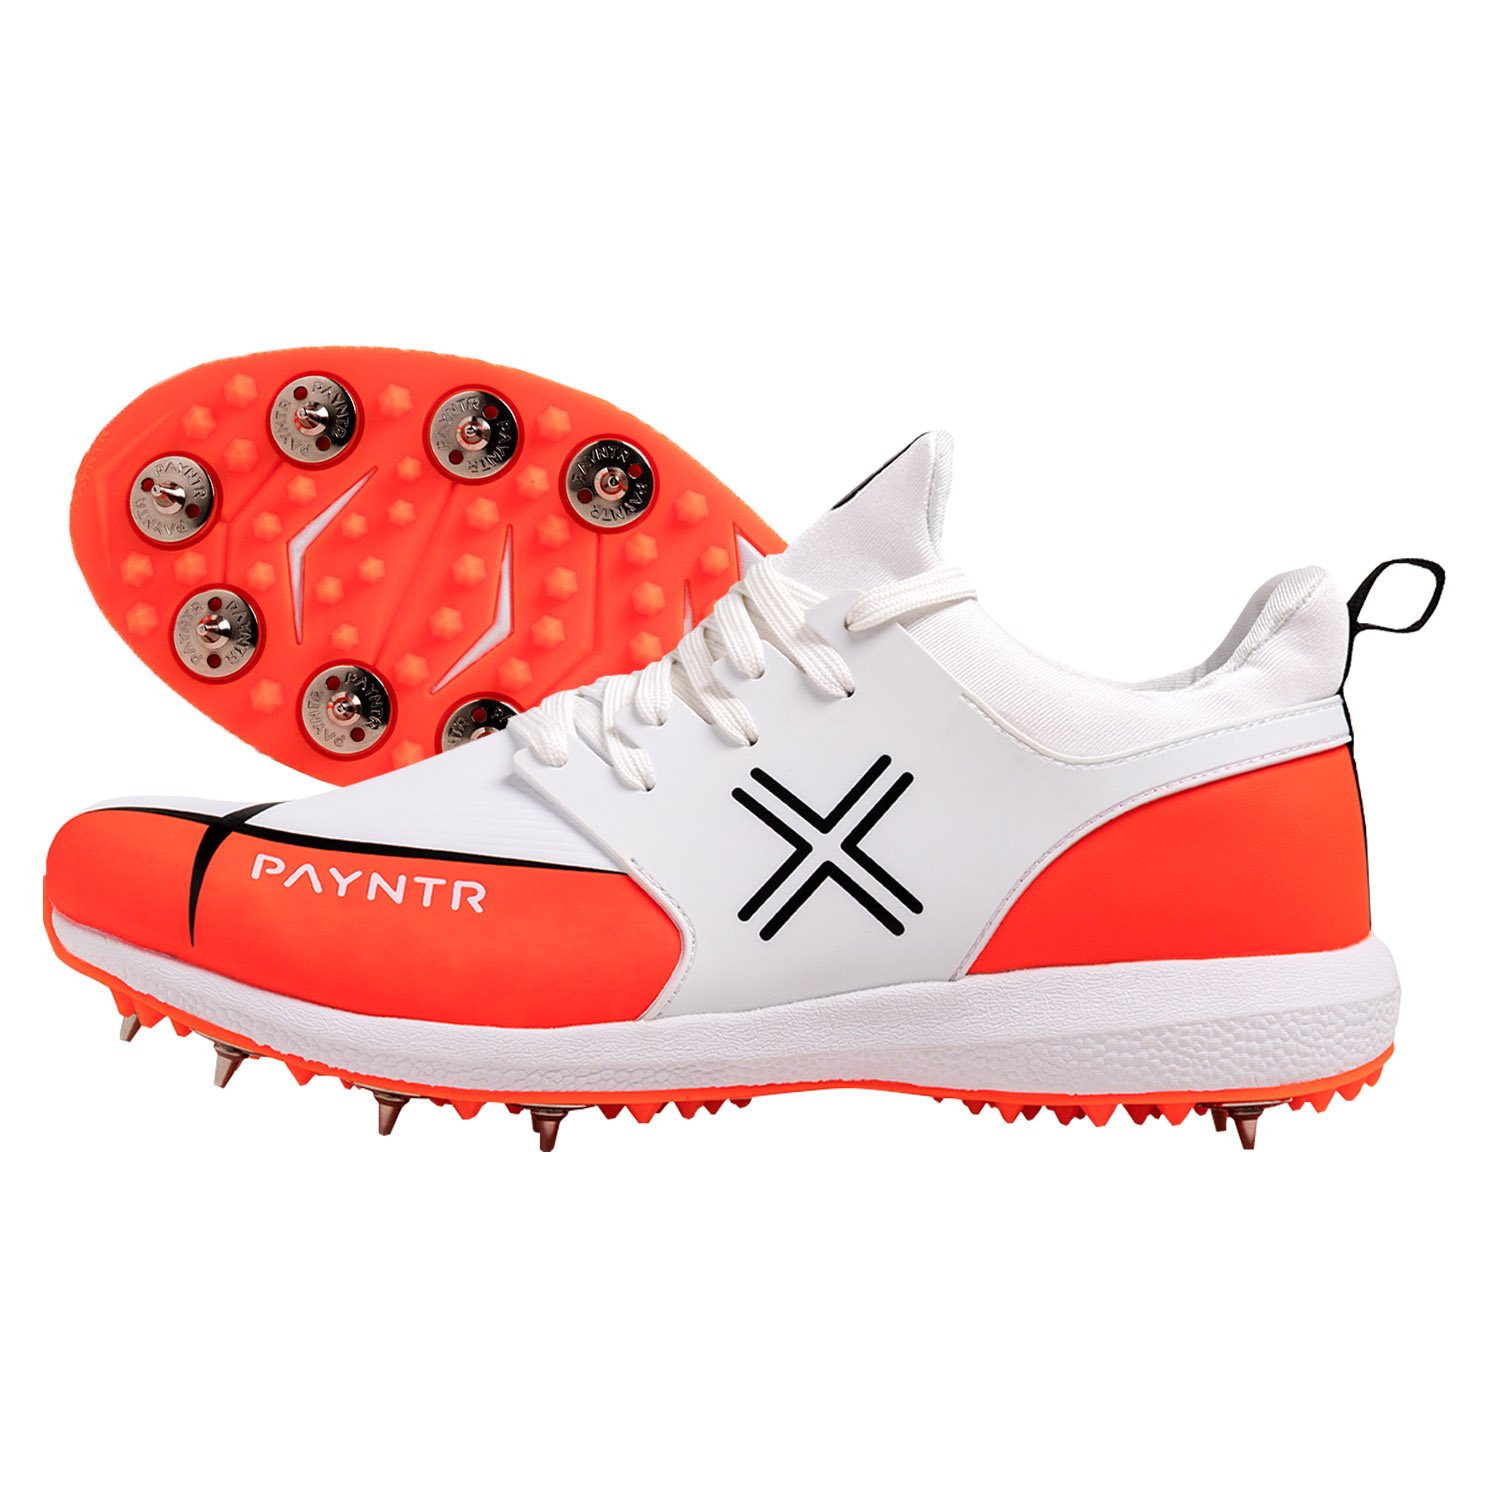 payntr cricket shoes junior